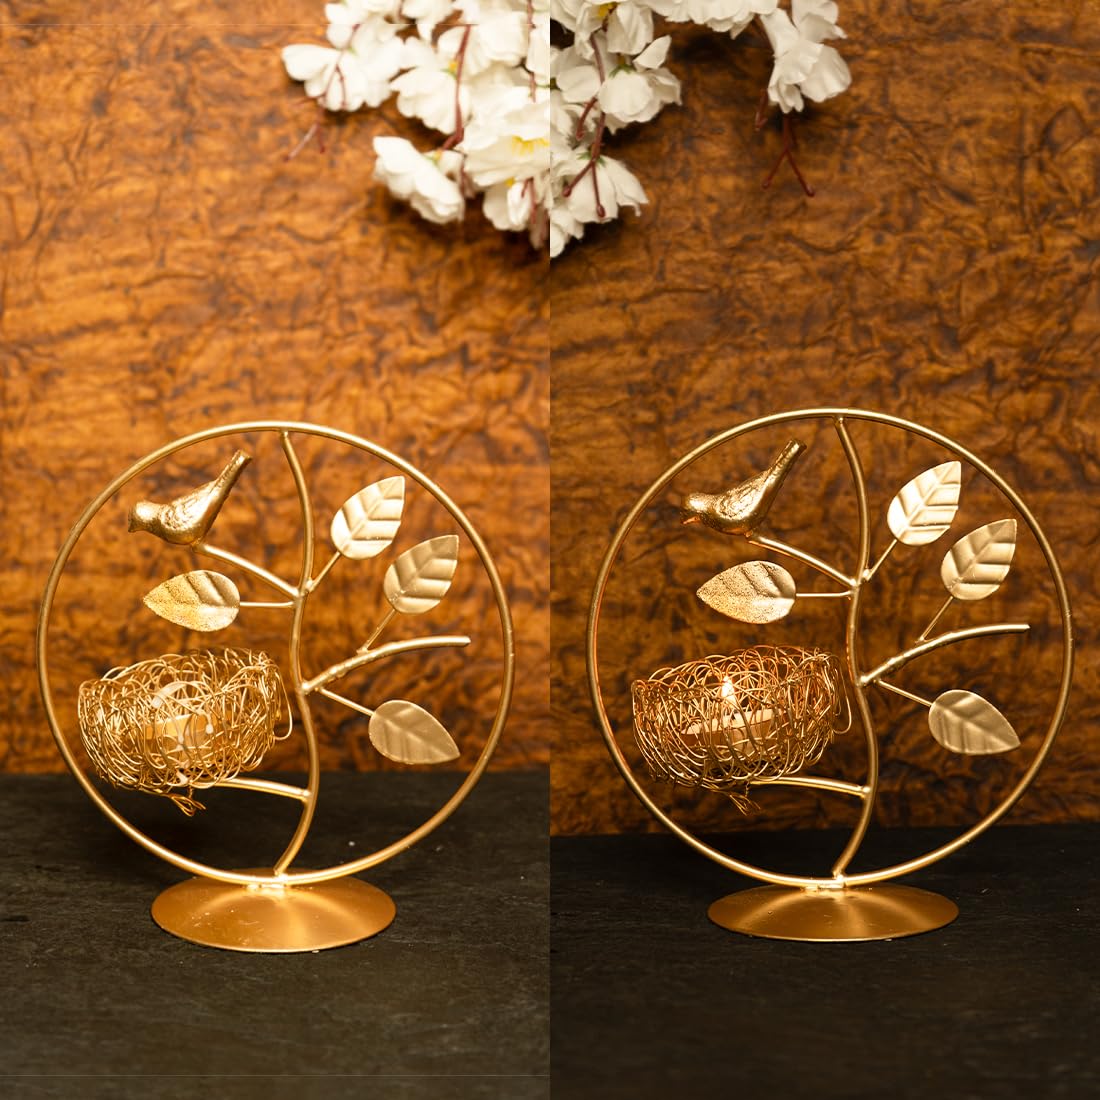 Ekhasa Metal Tealight Candle Holder for Home Decor|Perfect Candle Stand for Diwali Decoration and Table Decor|Indoor & Outdoor, Festival Decorative Candles Gift Items (Bird Nest Tealight), Gold